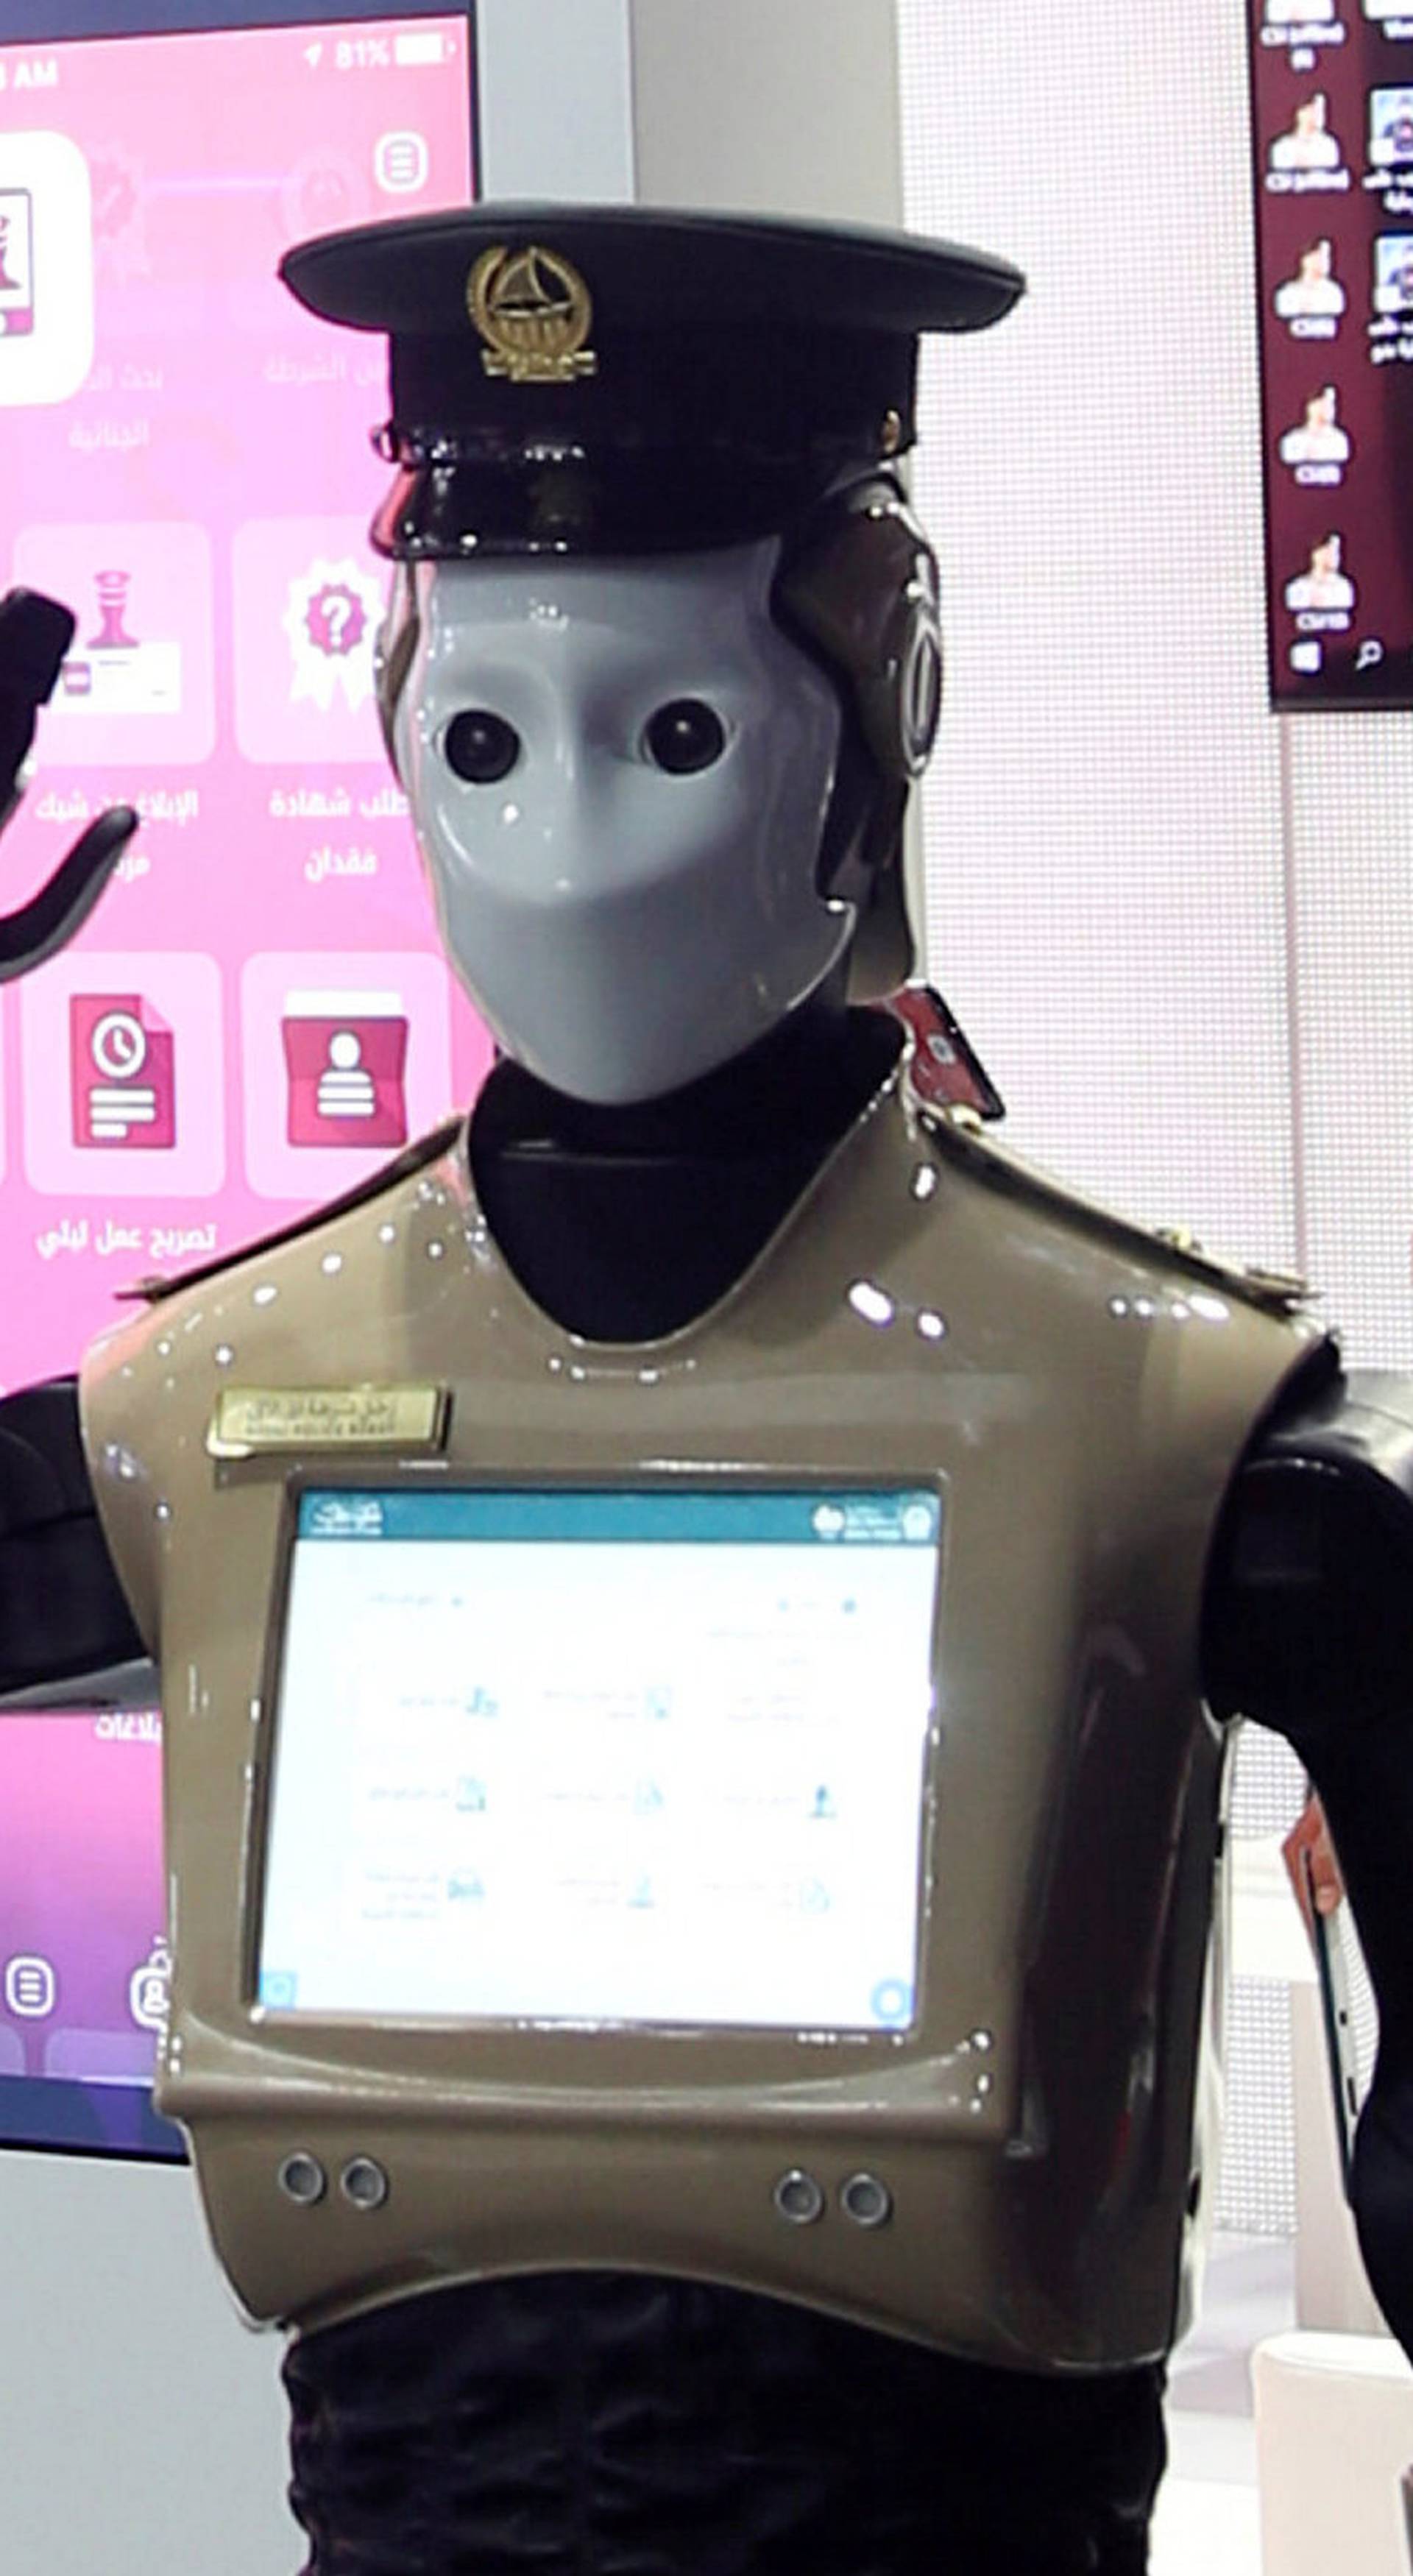 Operational robot policeman is seen at the opening of the 4th Gulf Information Security Expo and Conference (GISEC) in Dubai